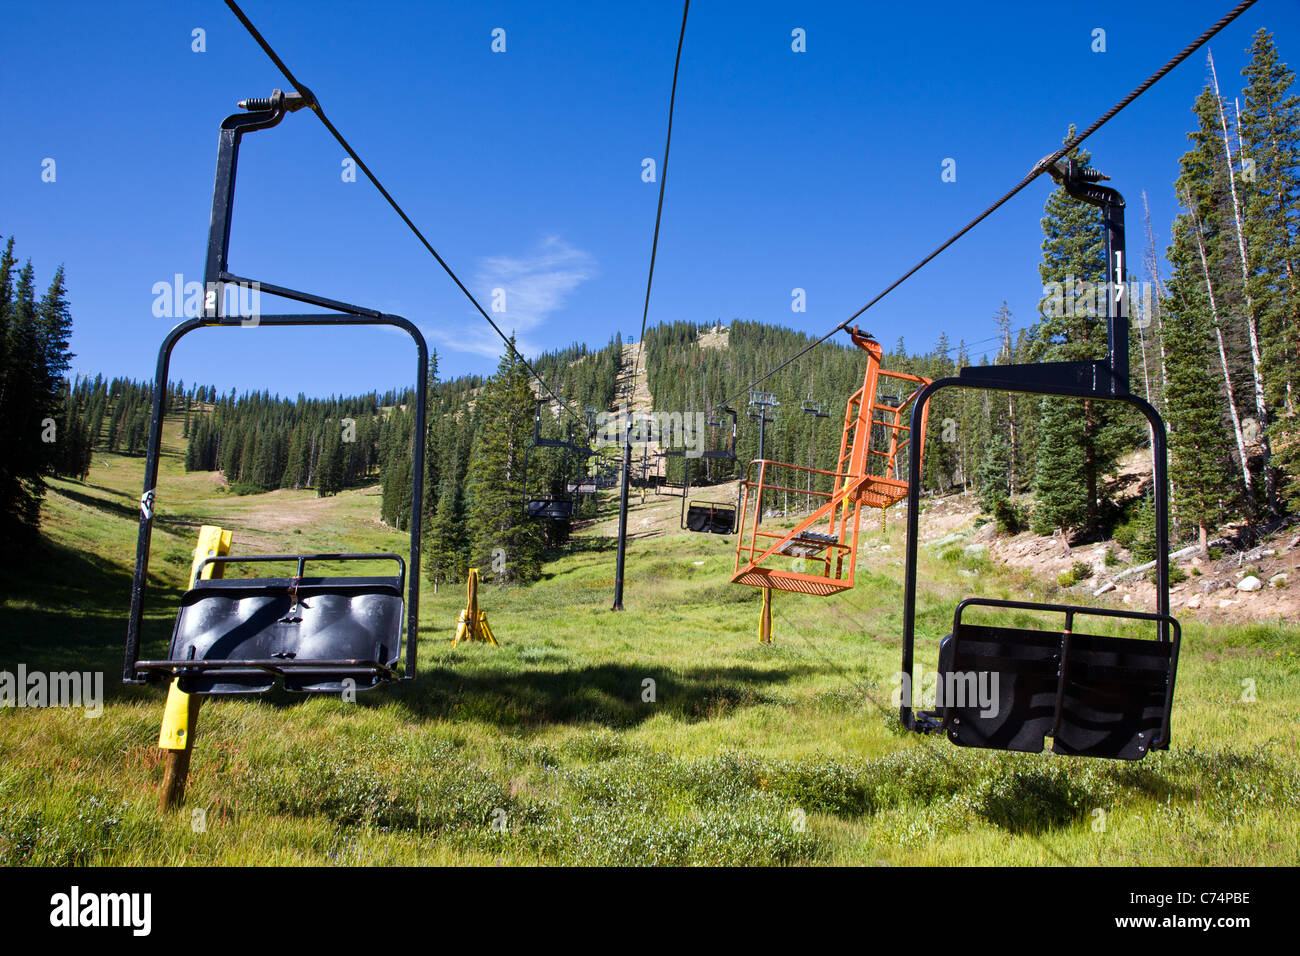 Summer view of Monarch Mountain ski area situated at 10,790' altitude in the Sawatch Range of the Rocky Mountains, Colorado, USA Stock Photo